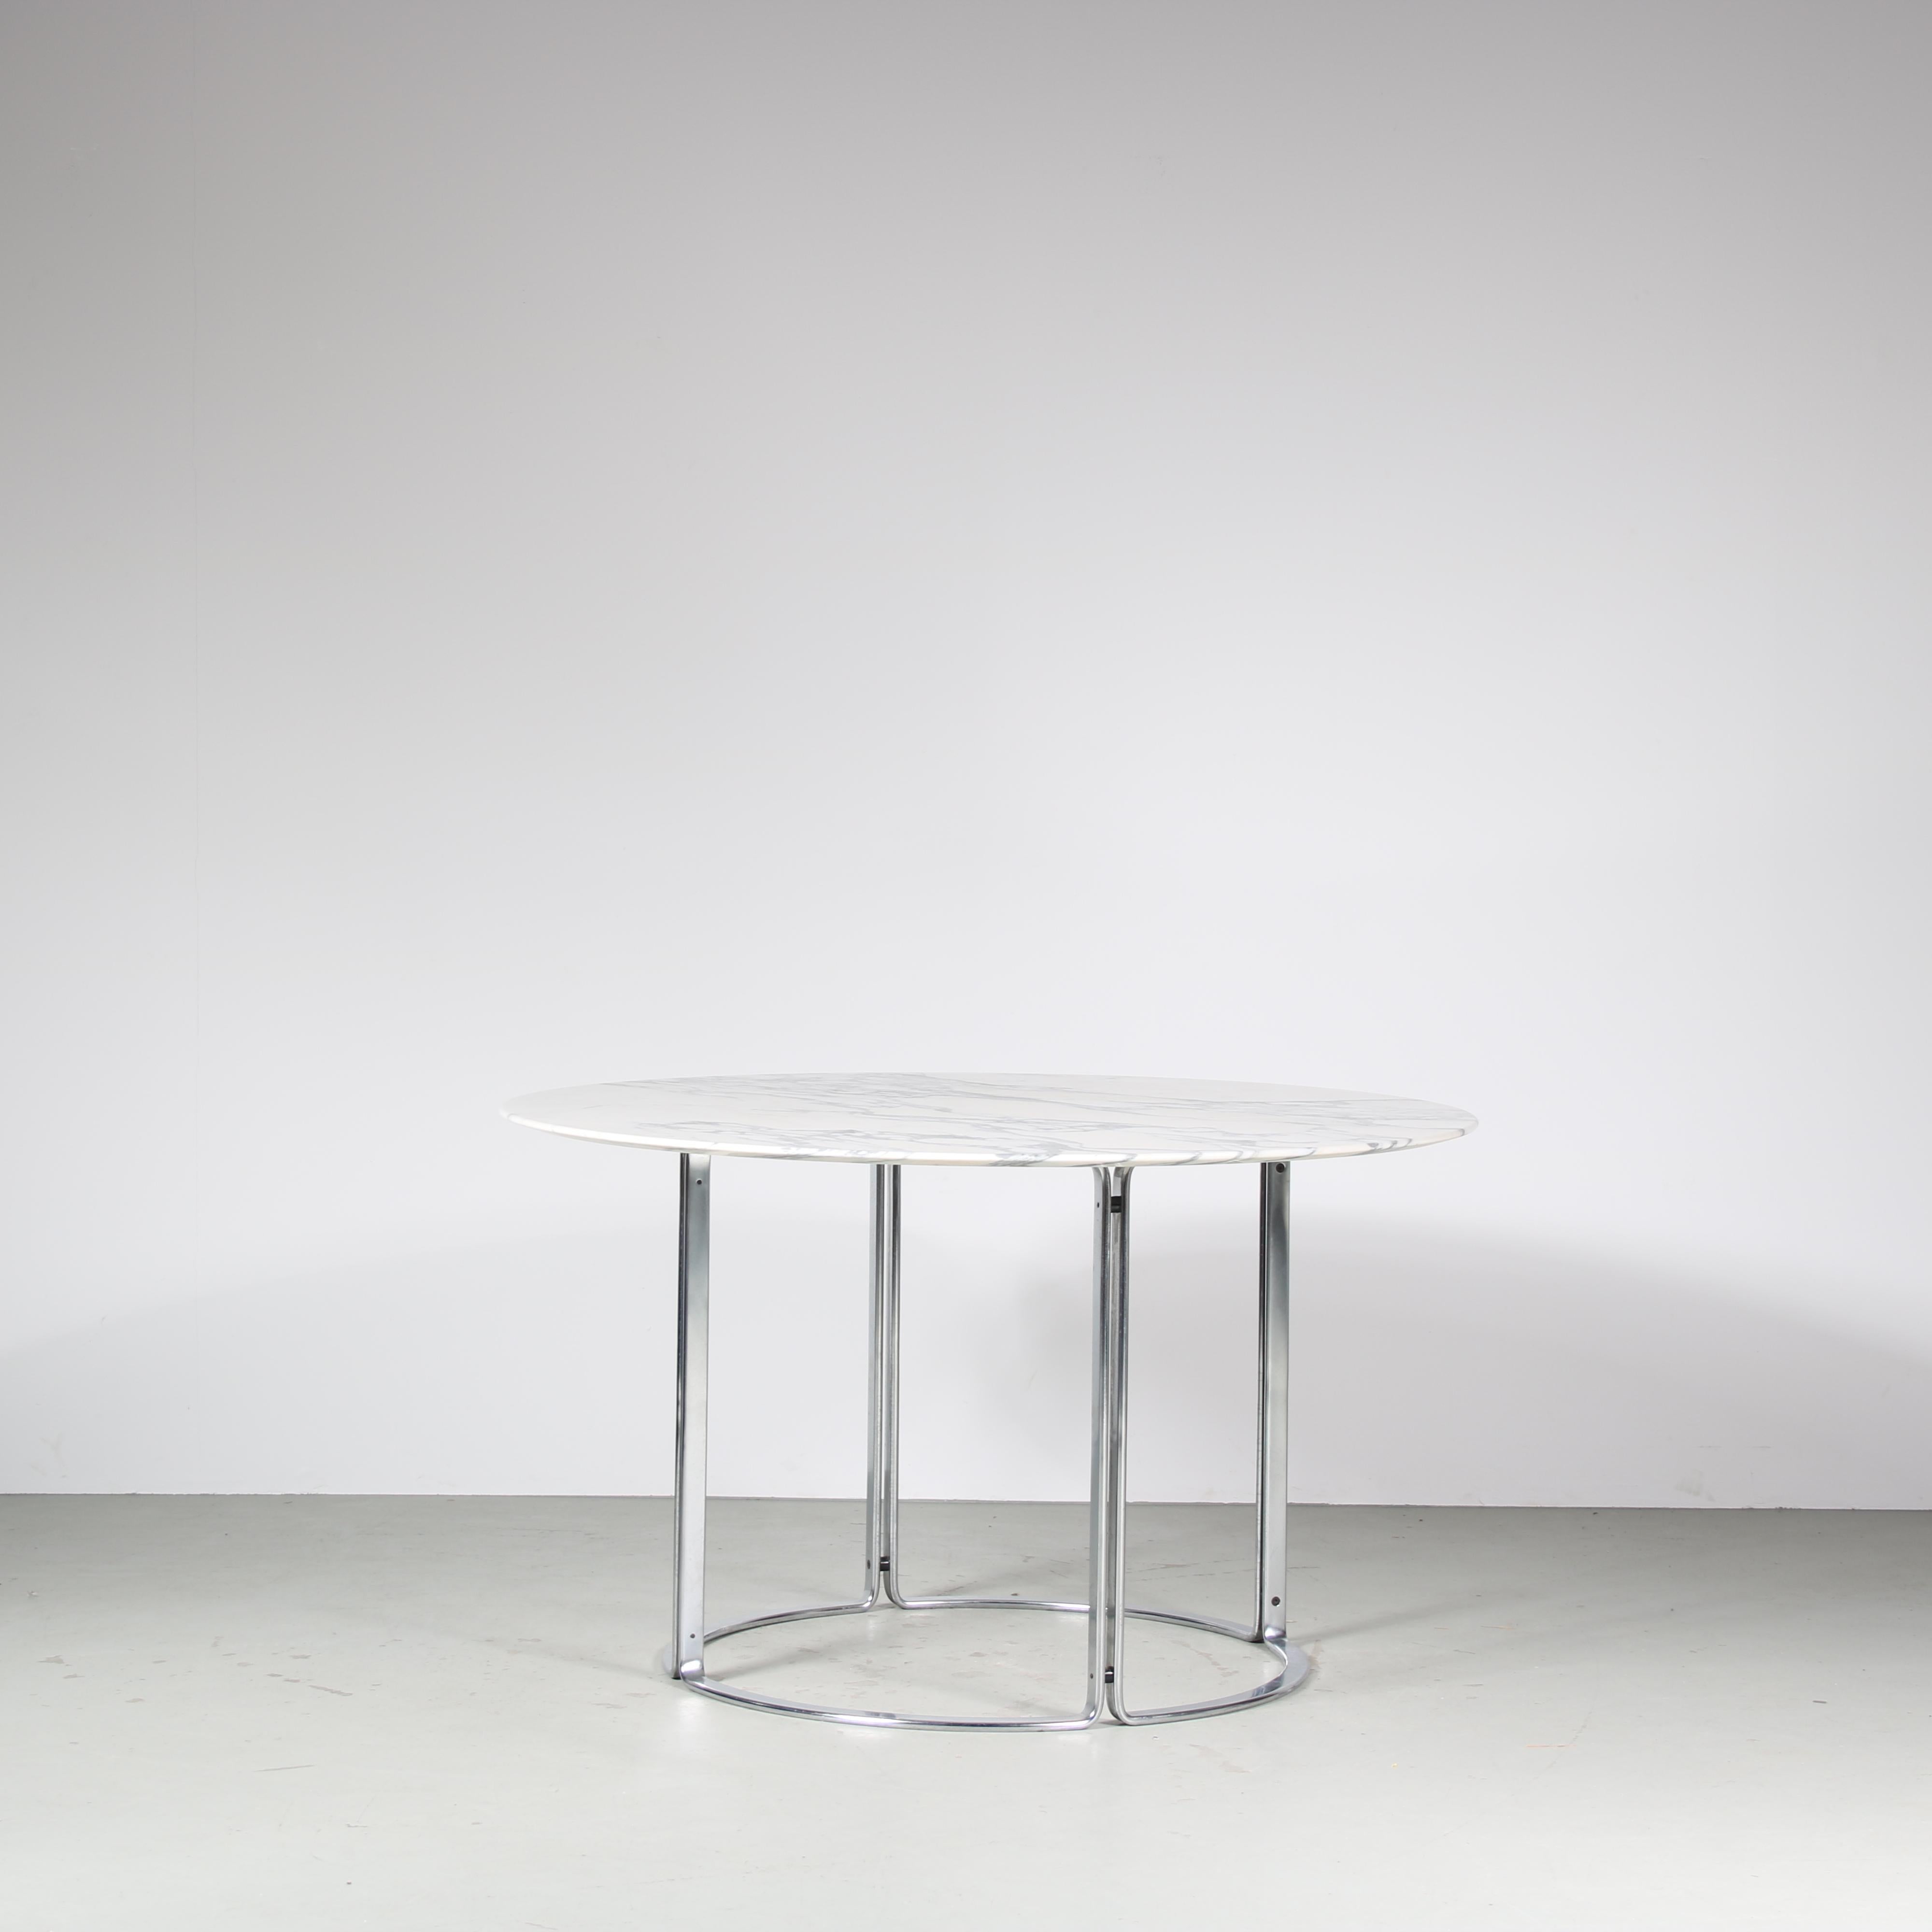 A beautiful round dining table designed by Horst Brüning, manufactured by Kill International in Germany around 1960.

This high quality piece features a chrome plated metal base with a round white marble top. The metal base is really nicely made,